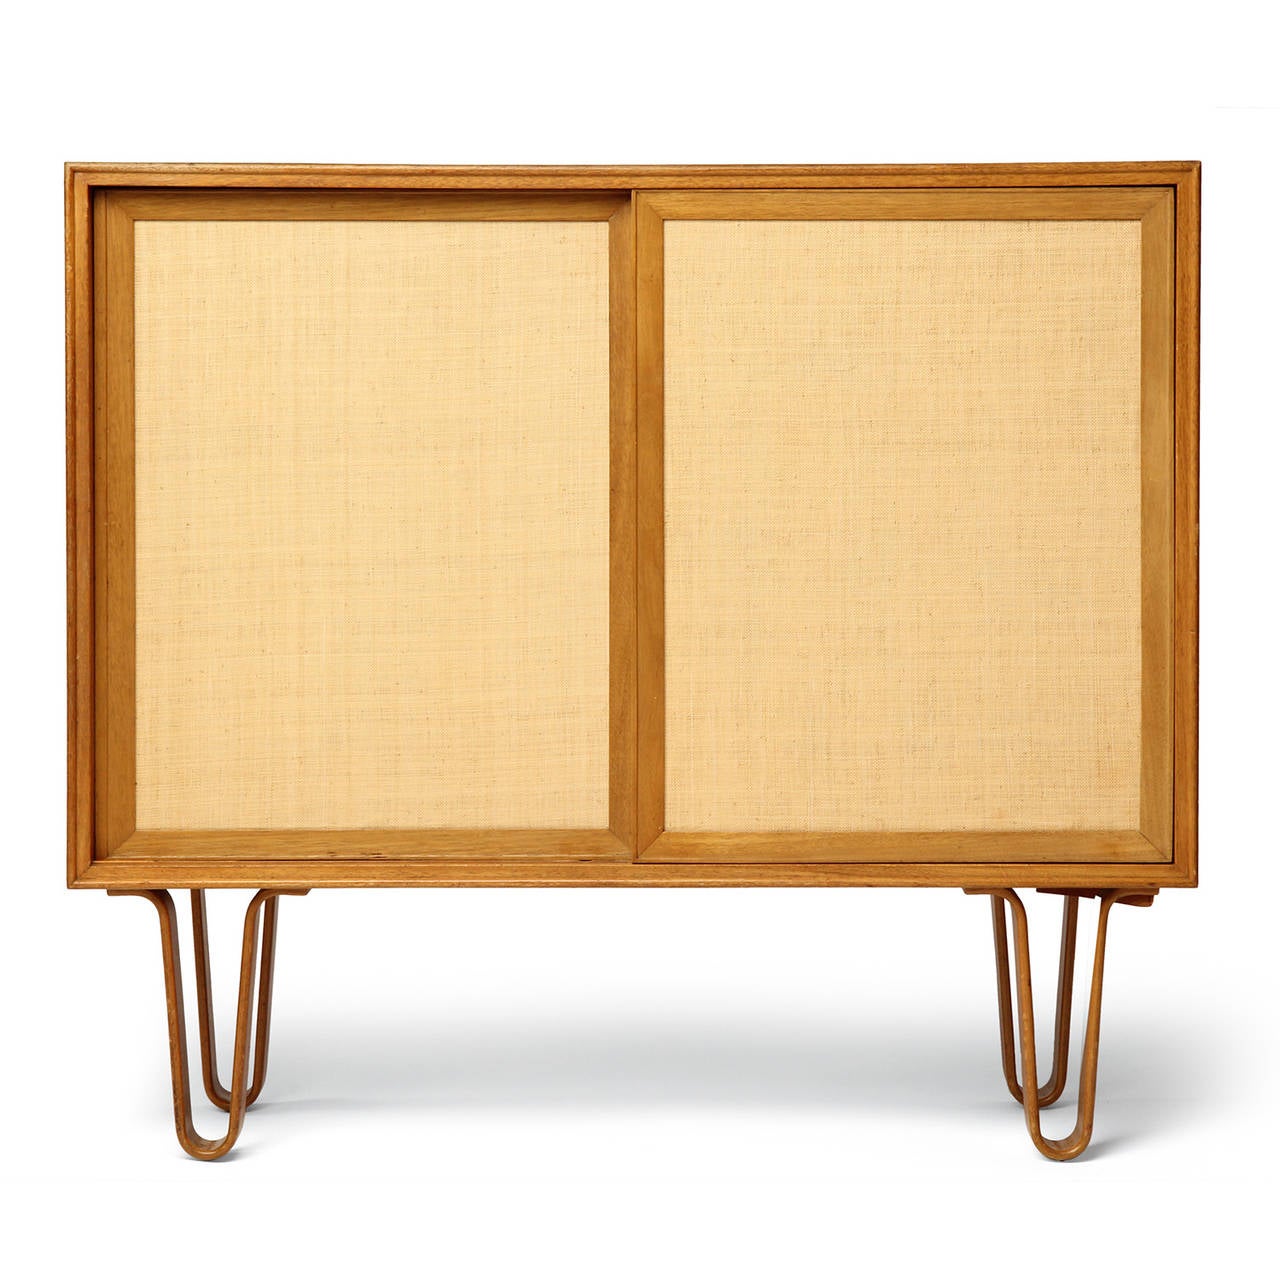 A spare and elegant rectilinear cabinet with grass cloth-fronted sliding panels concealing adjustable shelves, the case floating on sculptural hairpin turn bentwood legs.